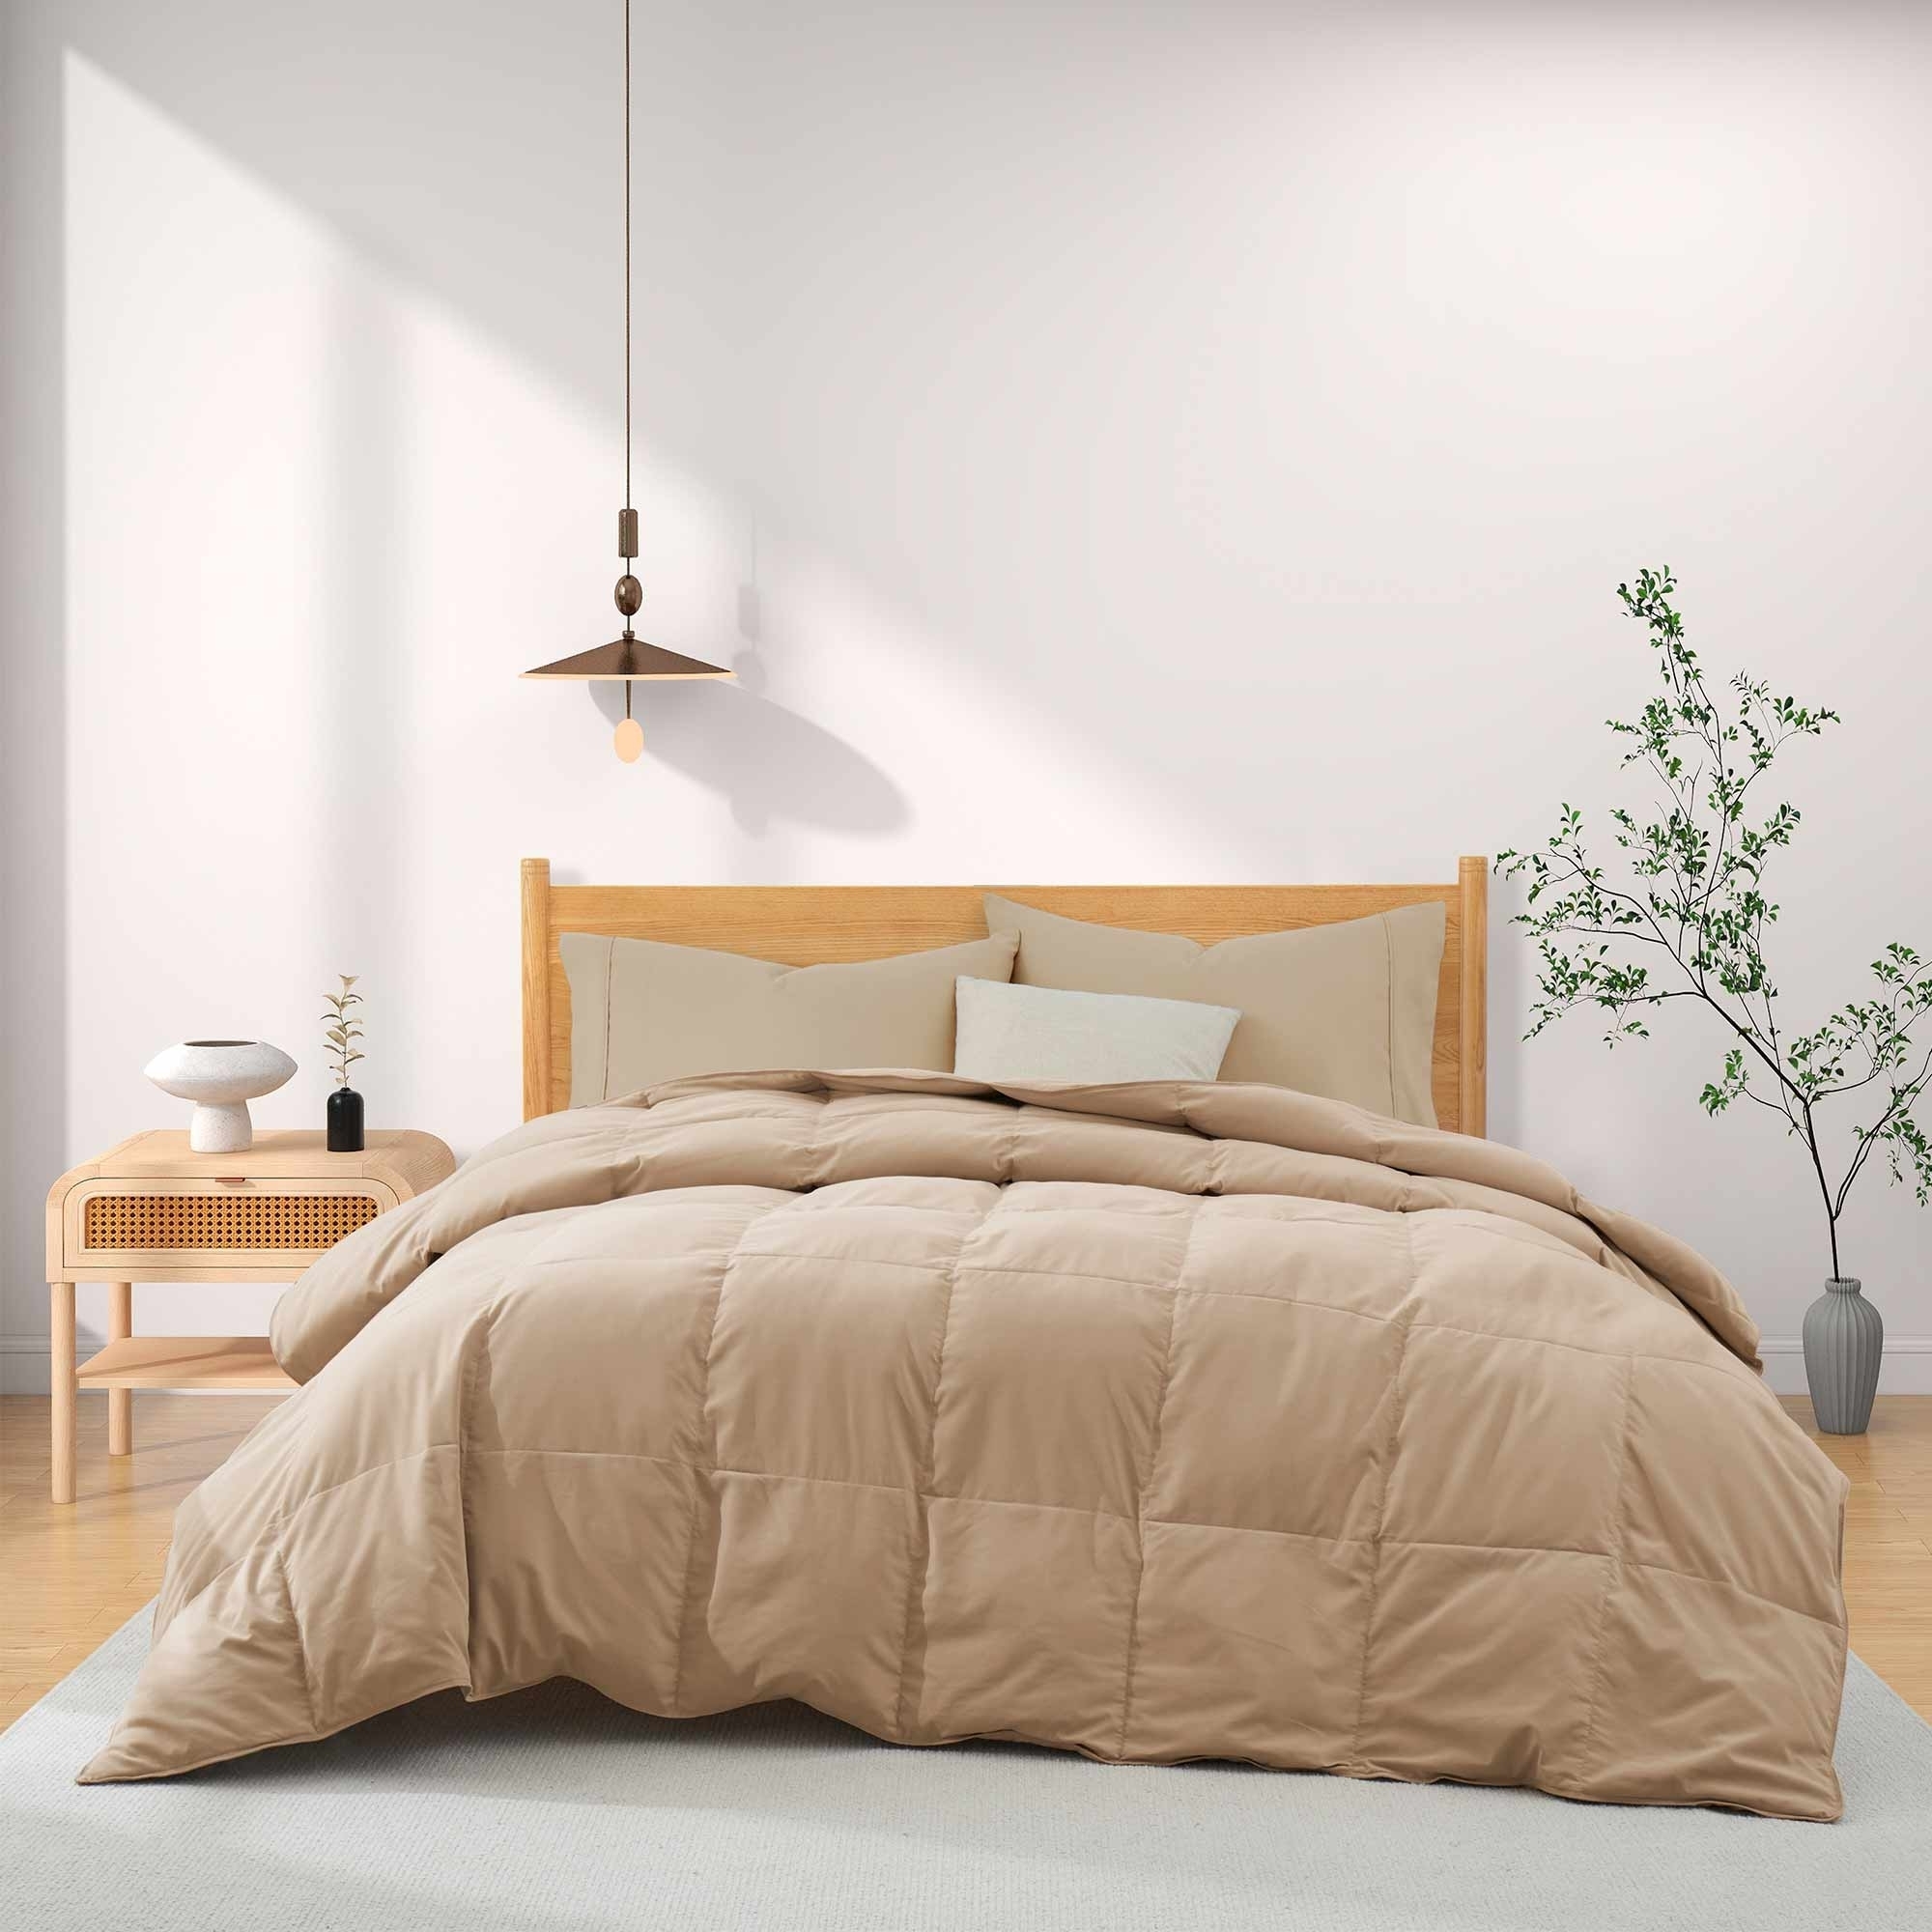 Lightweight Goose Feather And Down Comforter- Hotel Collection For Hot Sleepers - Ginger Root, Twin